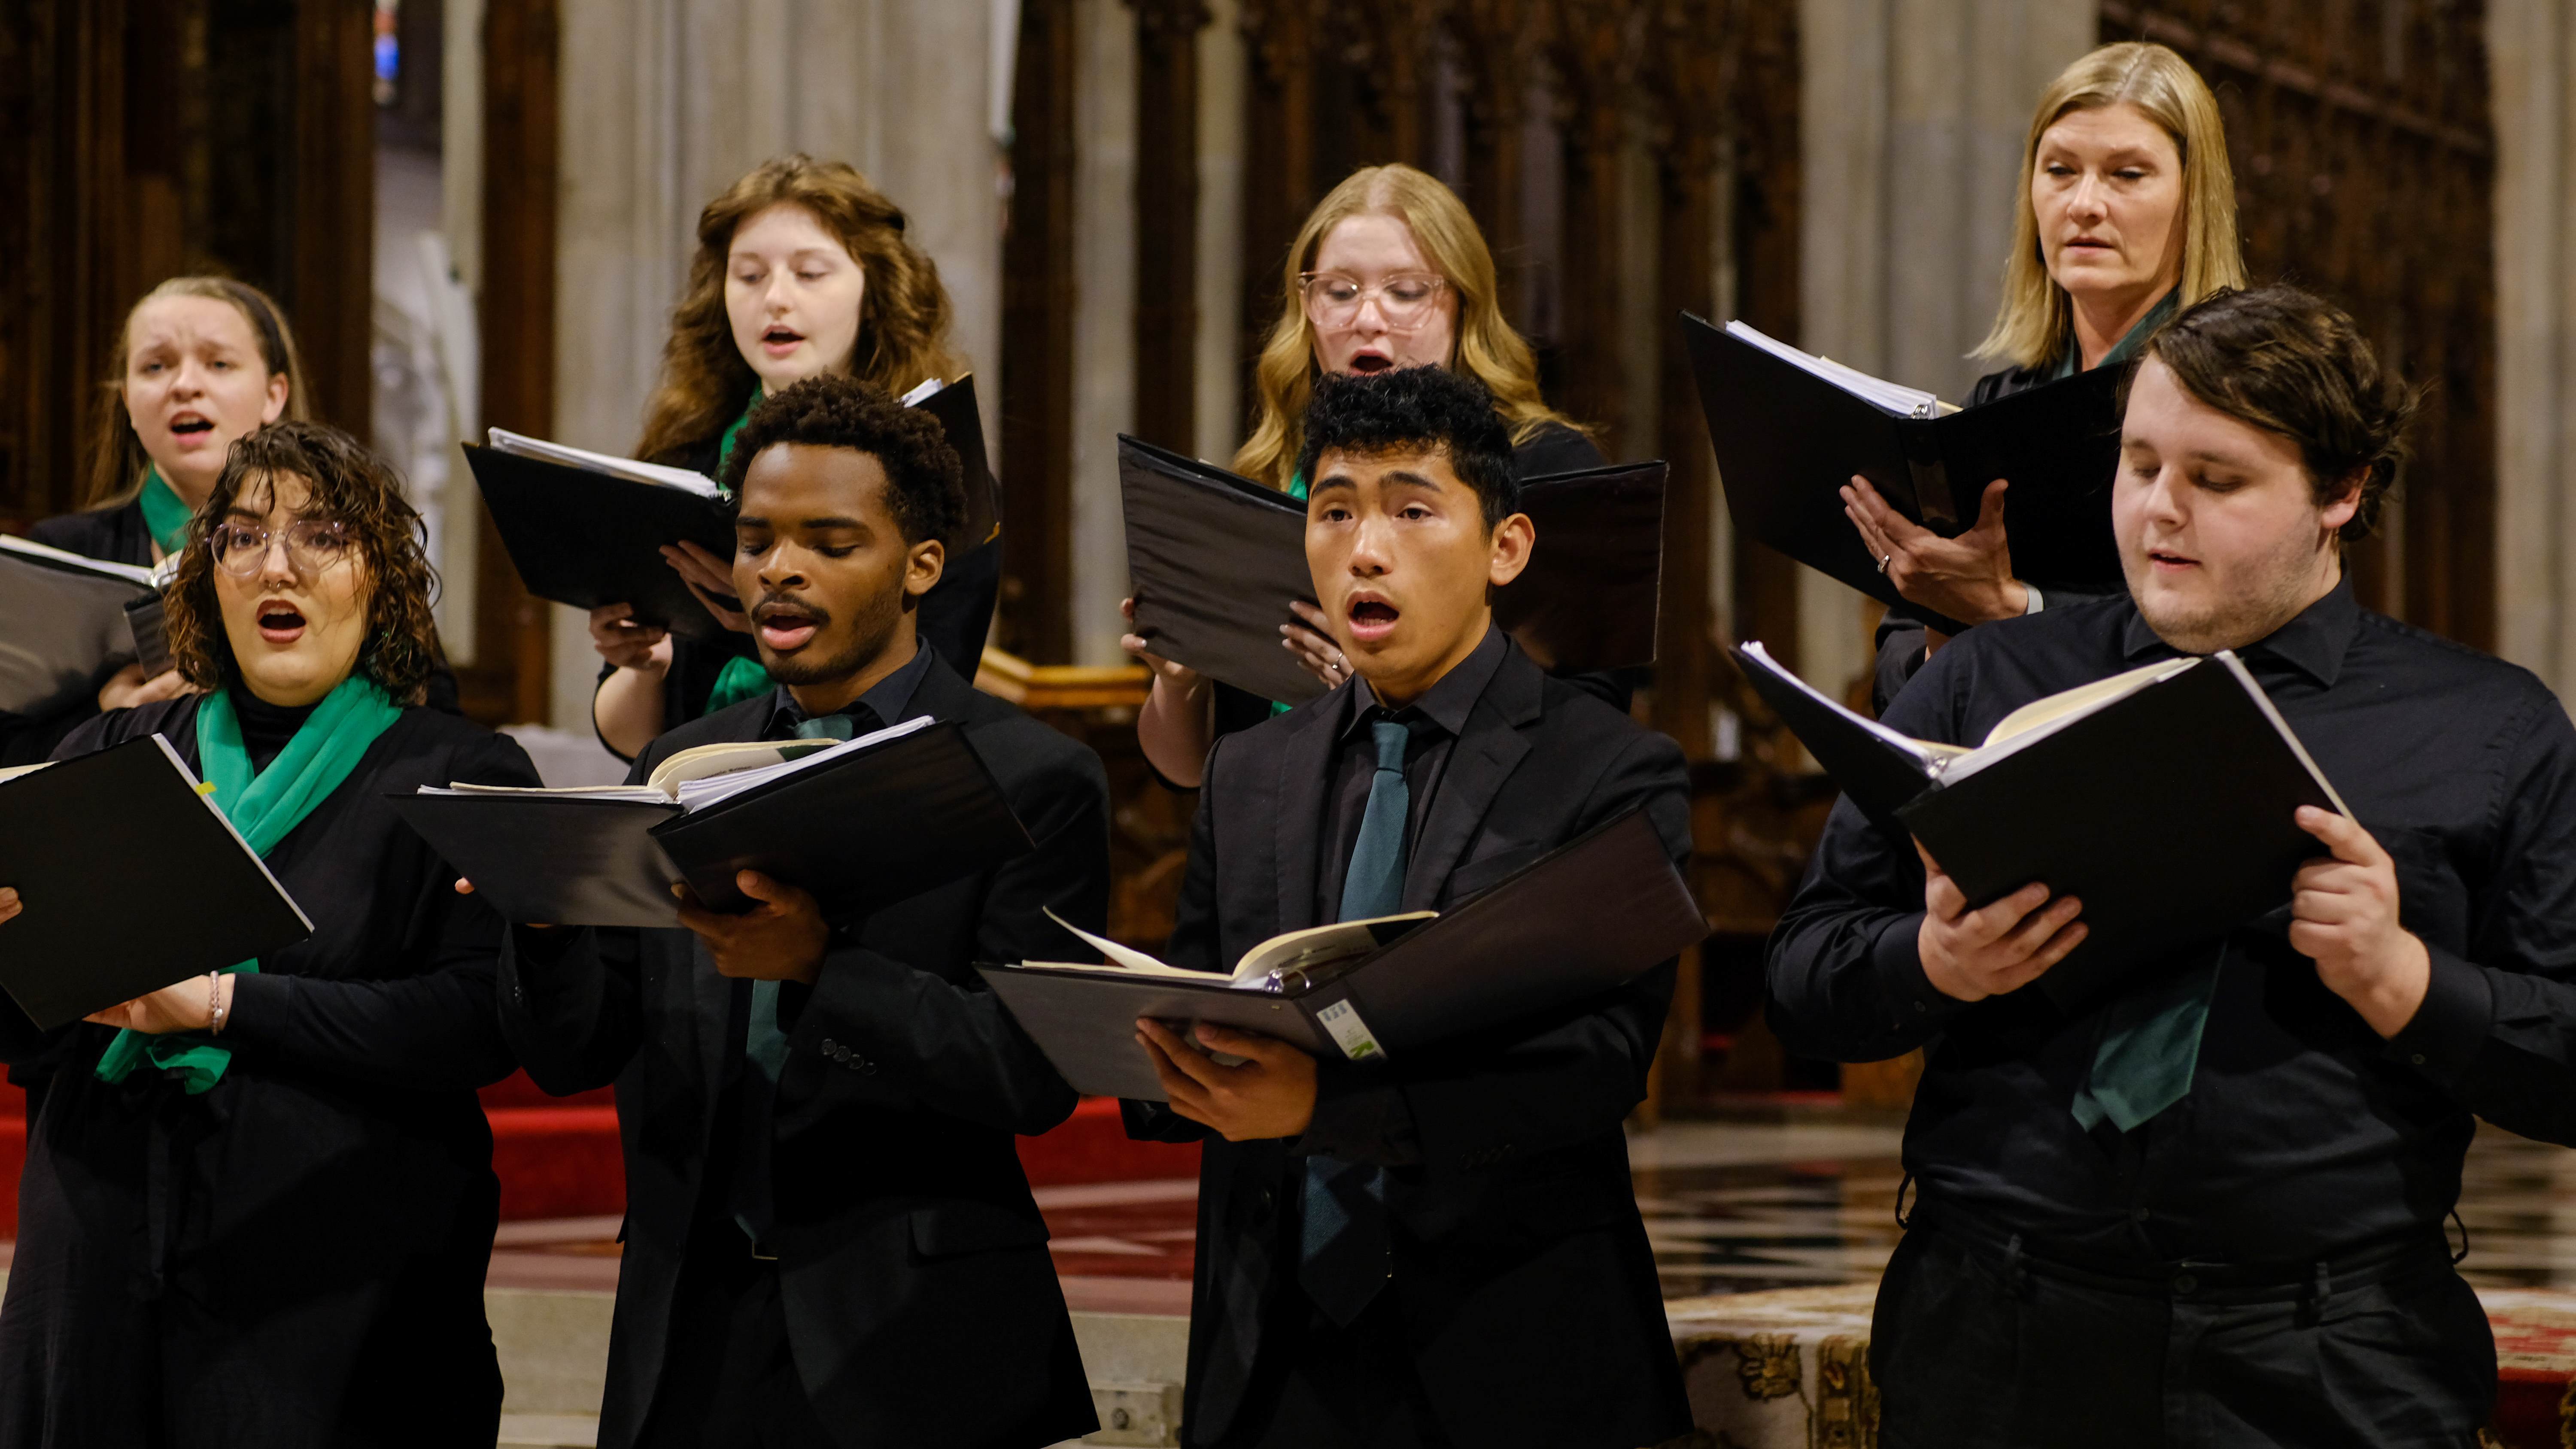 University Singers singing at a cathedral